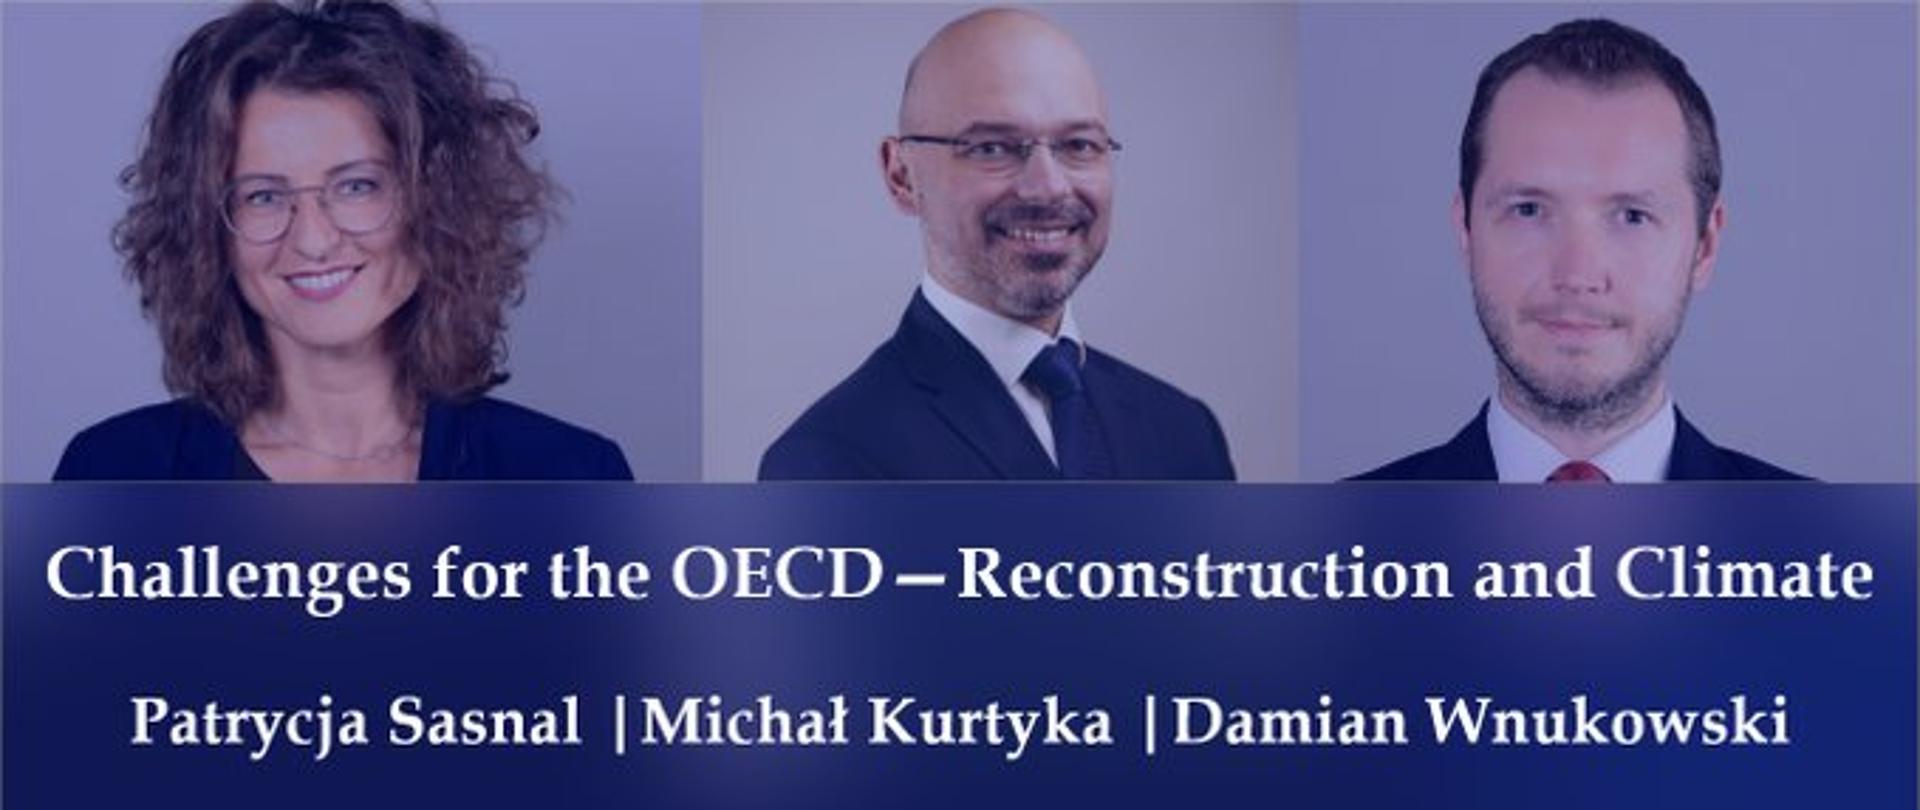 Challenges for the OECD - Reconstruction and Climate